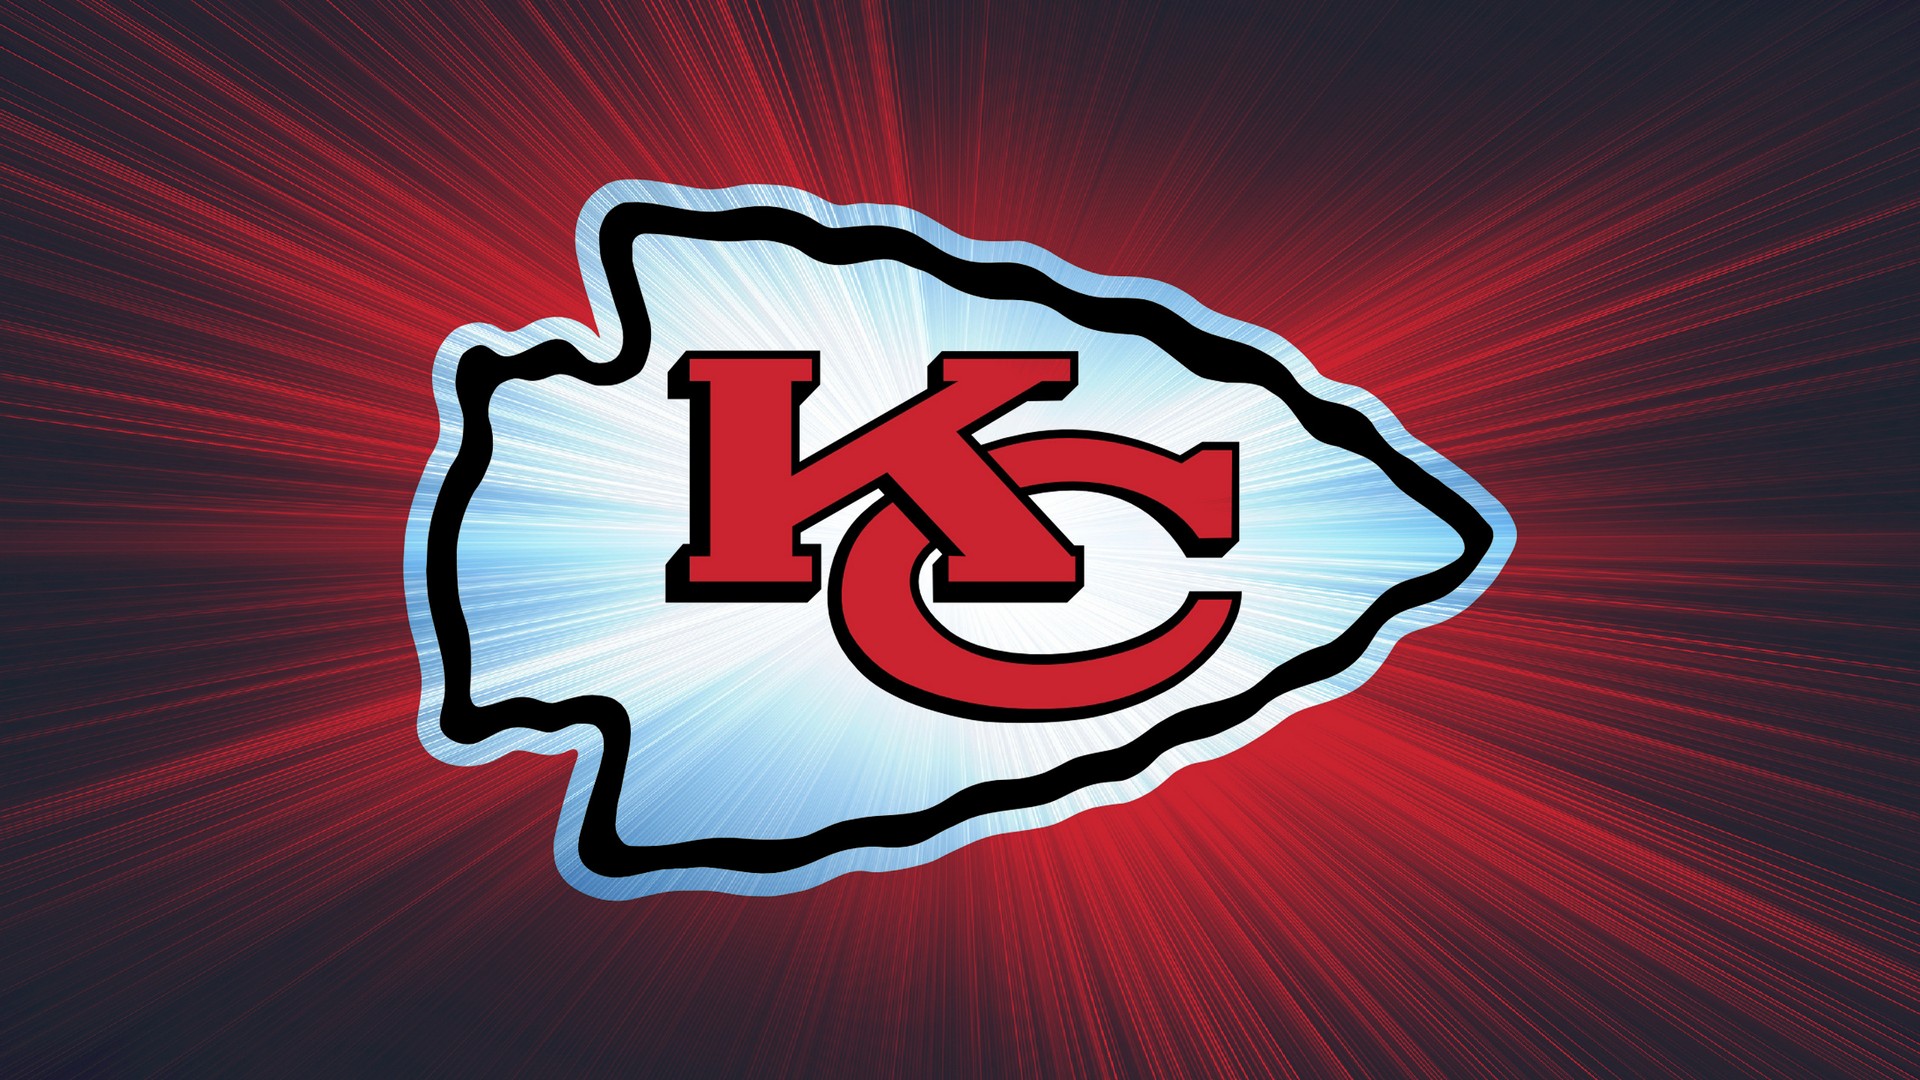 HD Kansas City Chiefs Wallpapers With Resolution 1920X1080 pixel. You can make this wallpaper for your Mac or Windows Desktop Background, iPhone, Android or Tablet and another Smartphone device for free